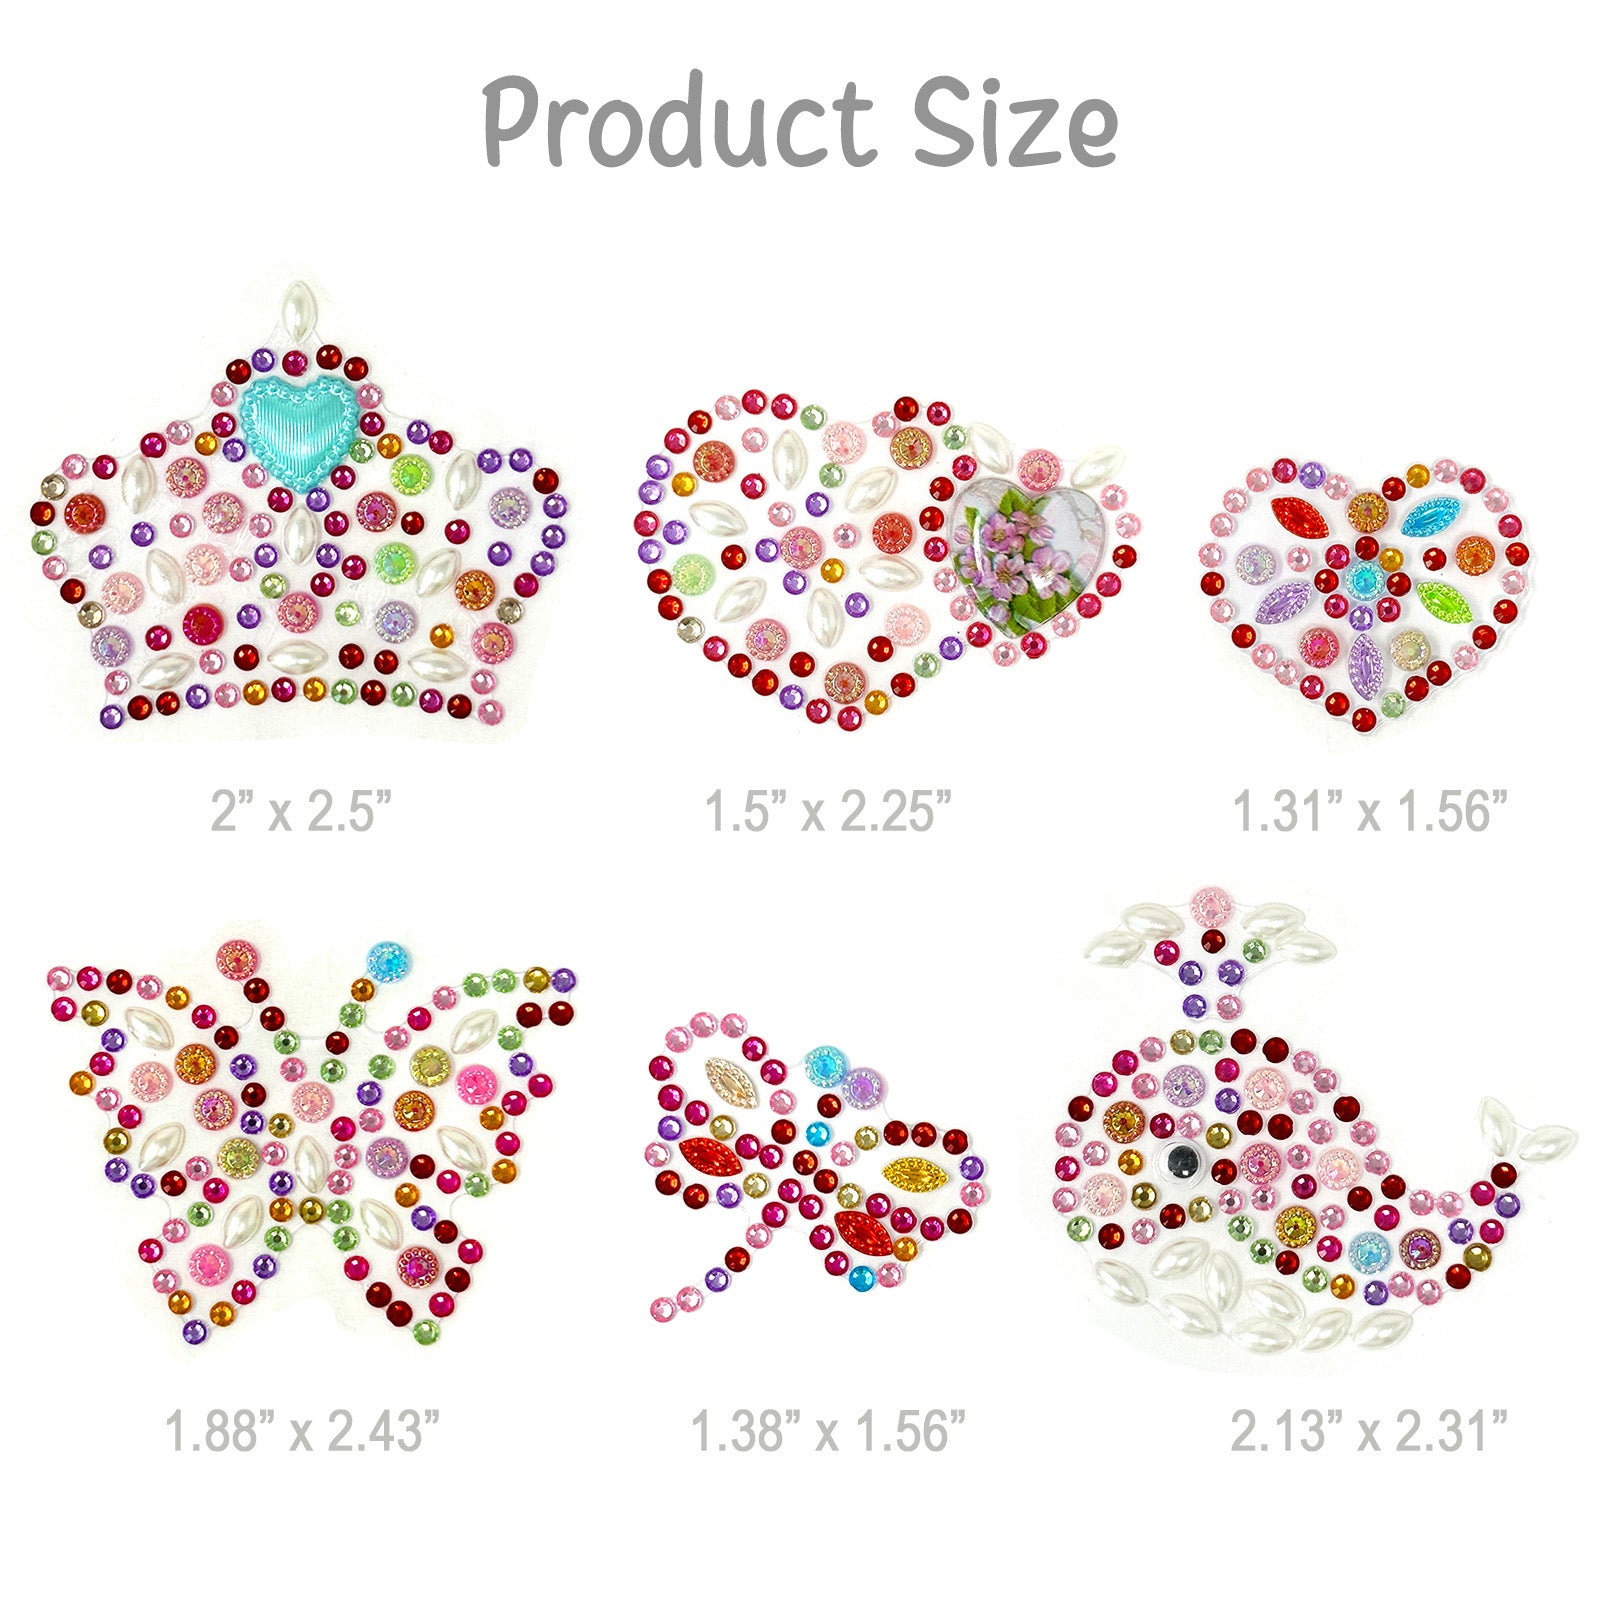 Wrapables Crystal Rhinestone Gem Stickers, Bling Jewel Adhesives for DIY Arts & Crafts, Smartphones, Water Bottles, Sunglass Cases (Set of 6) Floral